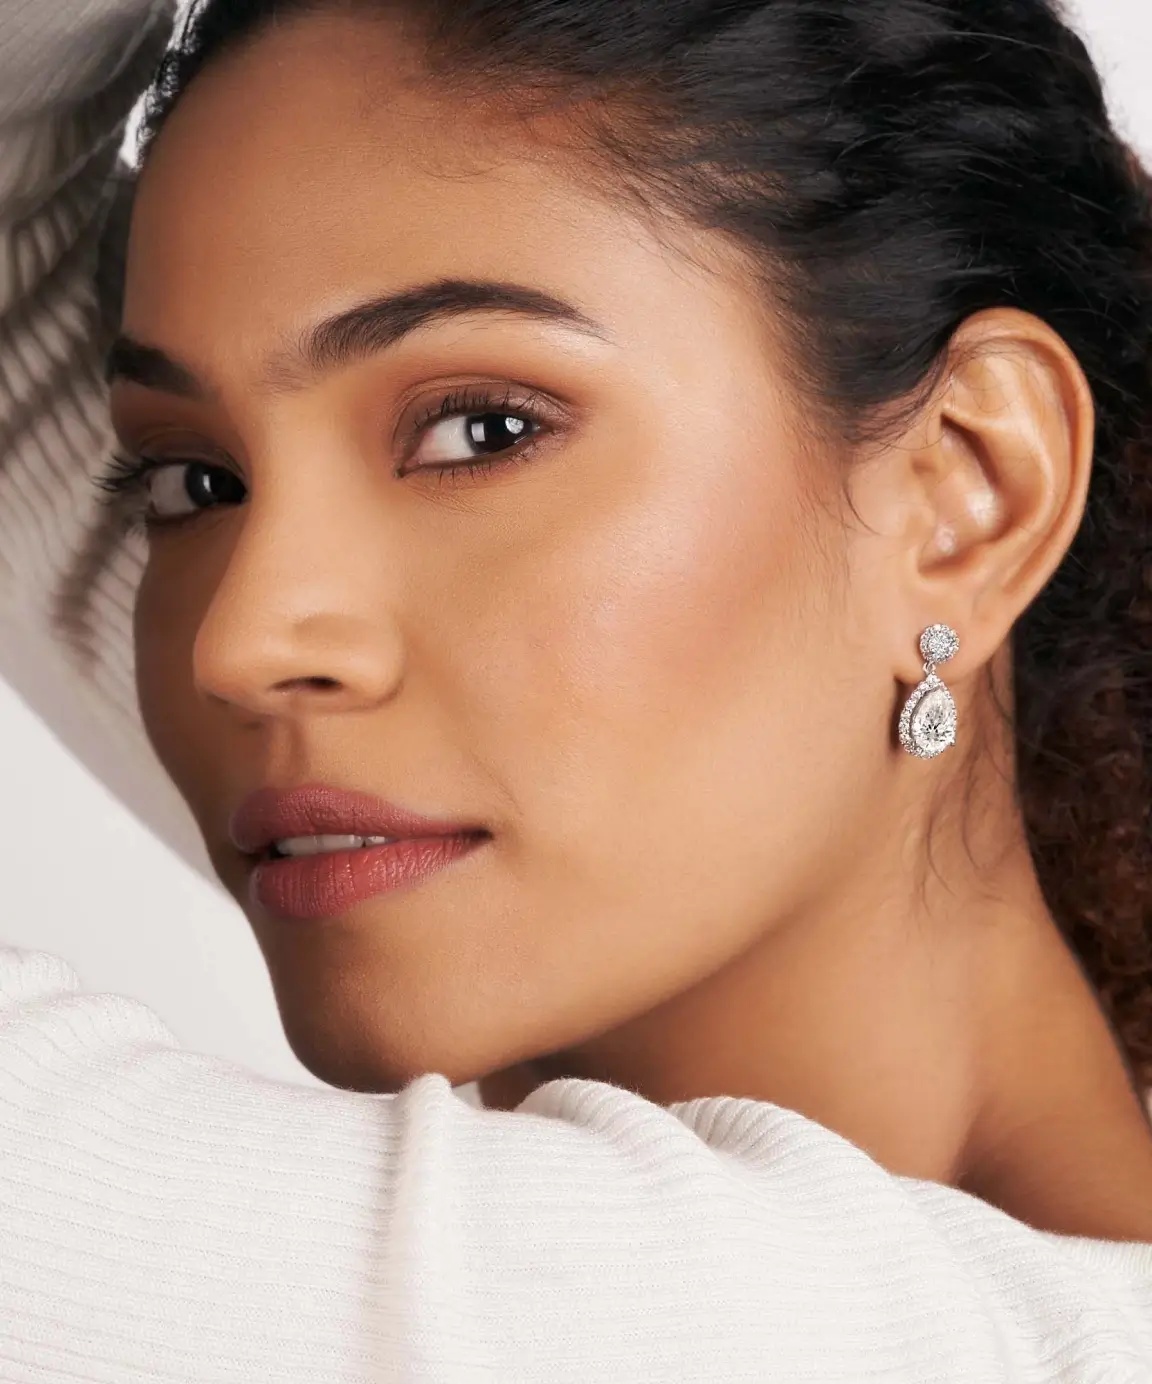 Dangling Diamond Earrings: A Timeless Classic for Bridal Jewelry